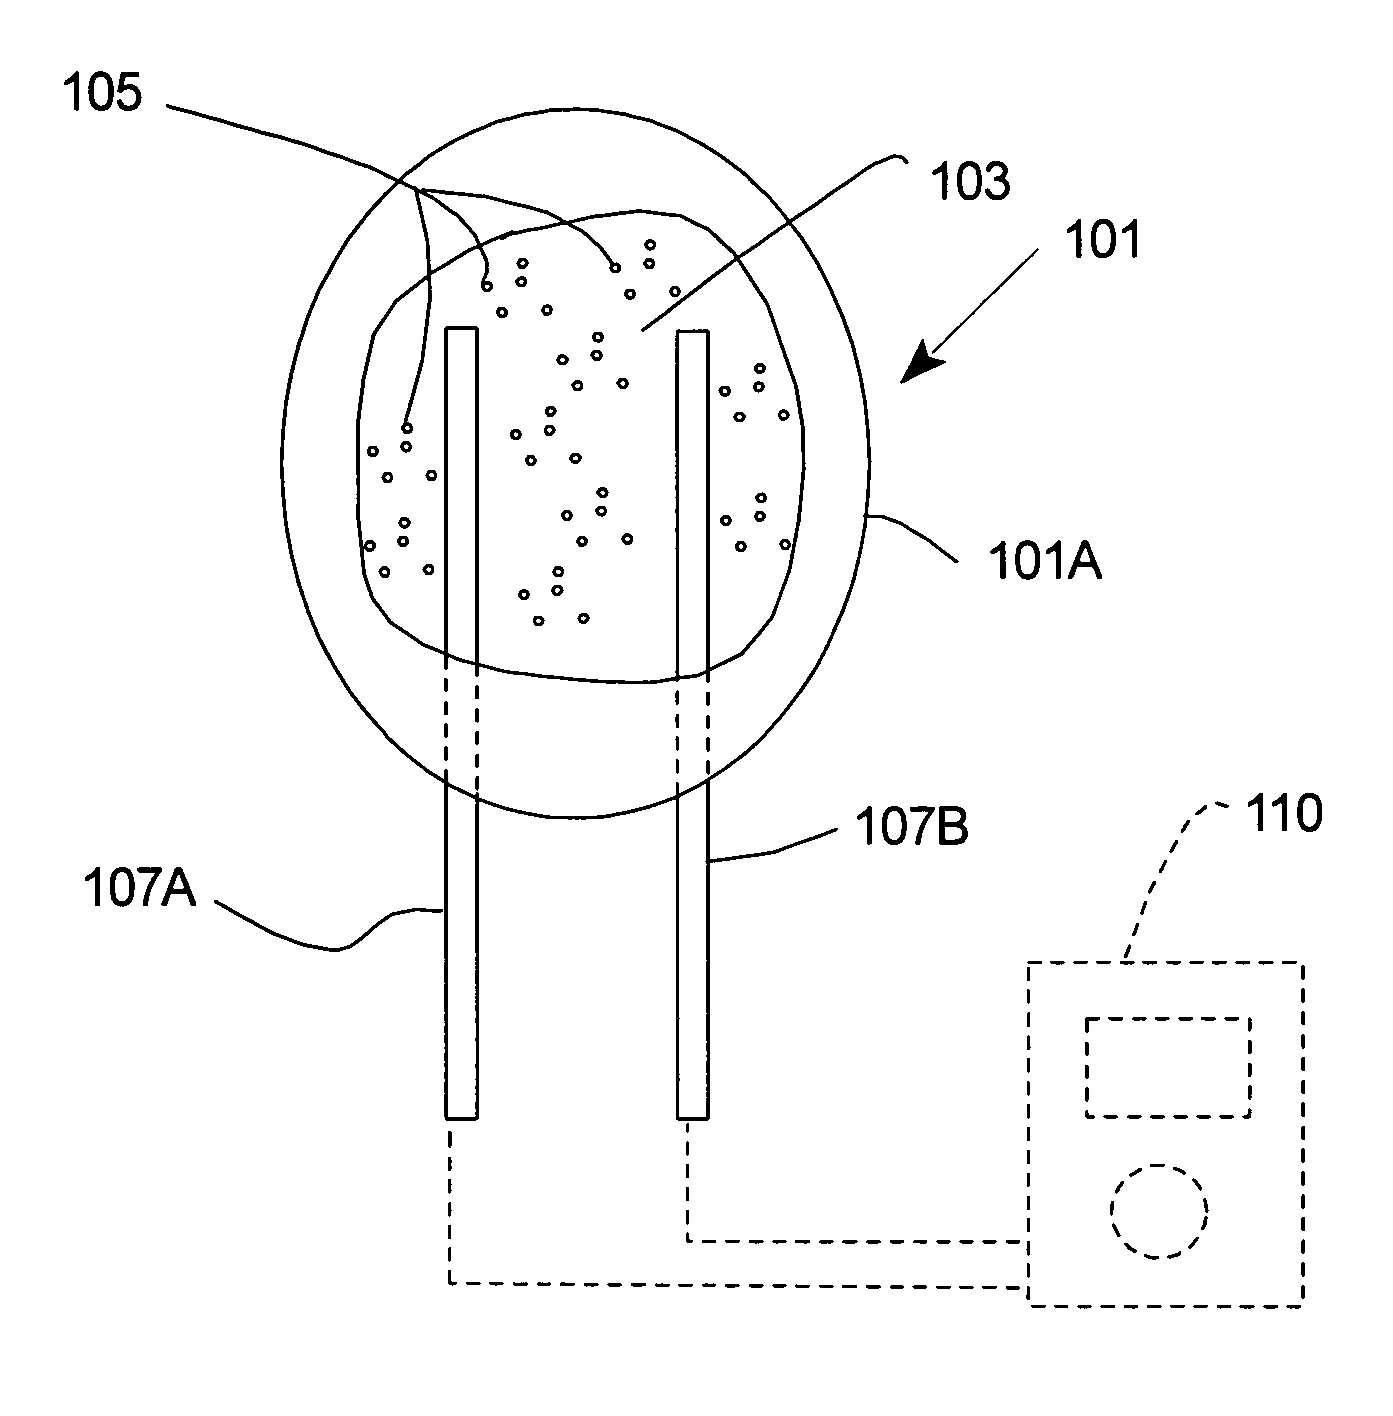 Method and apparatus for measuring degradation of insulation of electrical power system devices